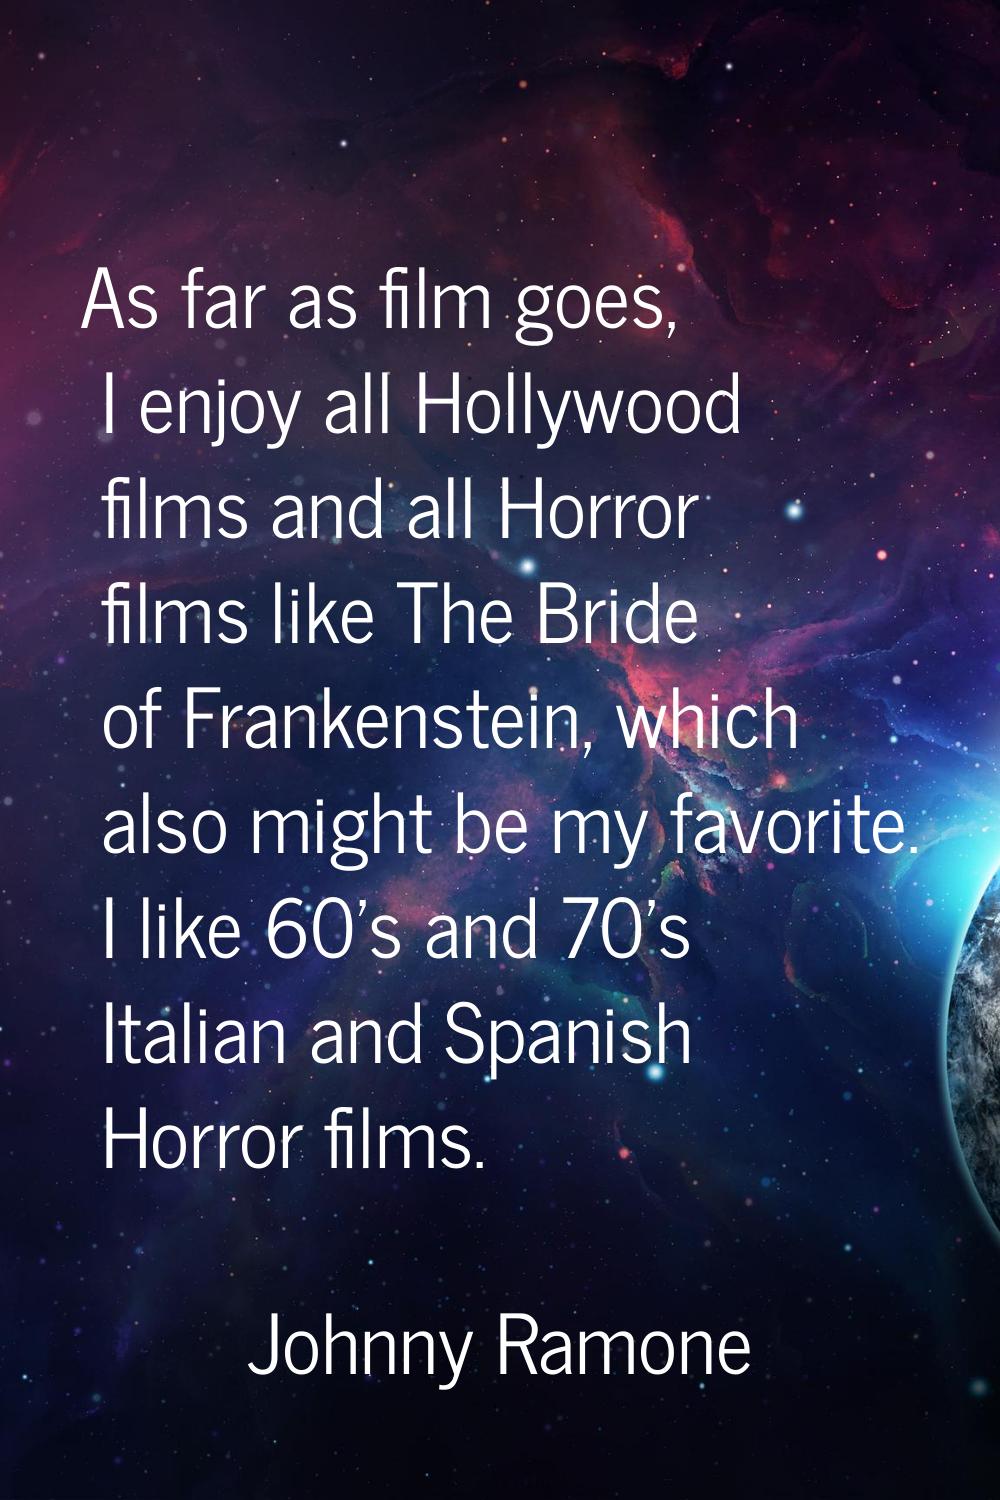 As far as film goes, I enjoy all Hollywood films and all Horror films like The Bride of Frankenstei